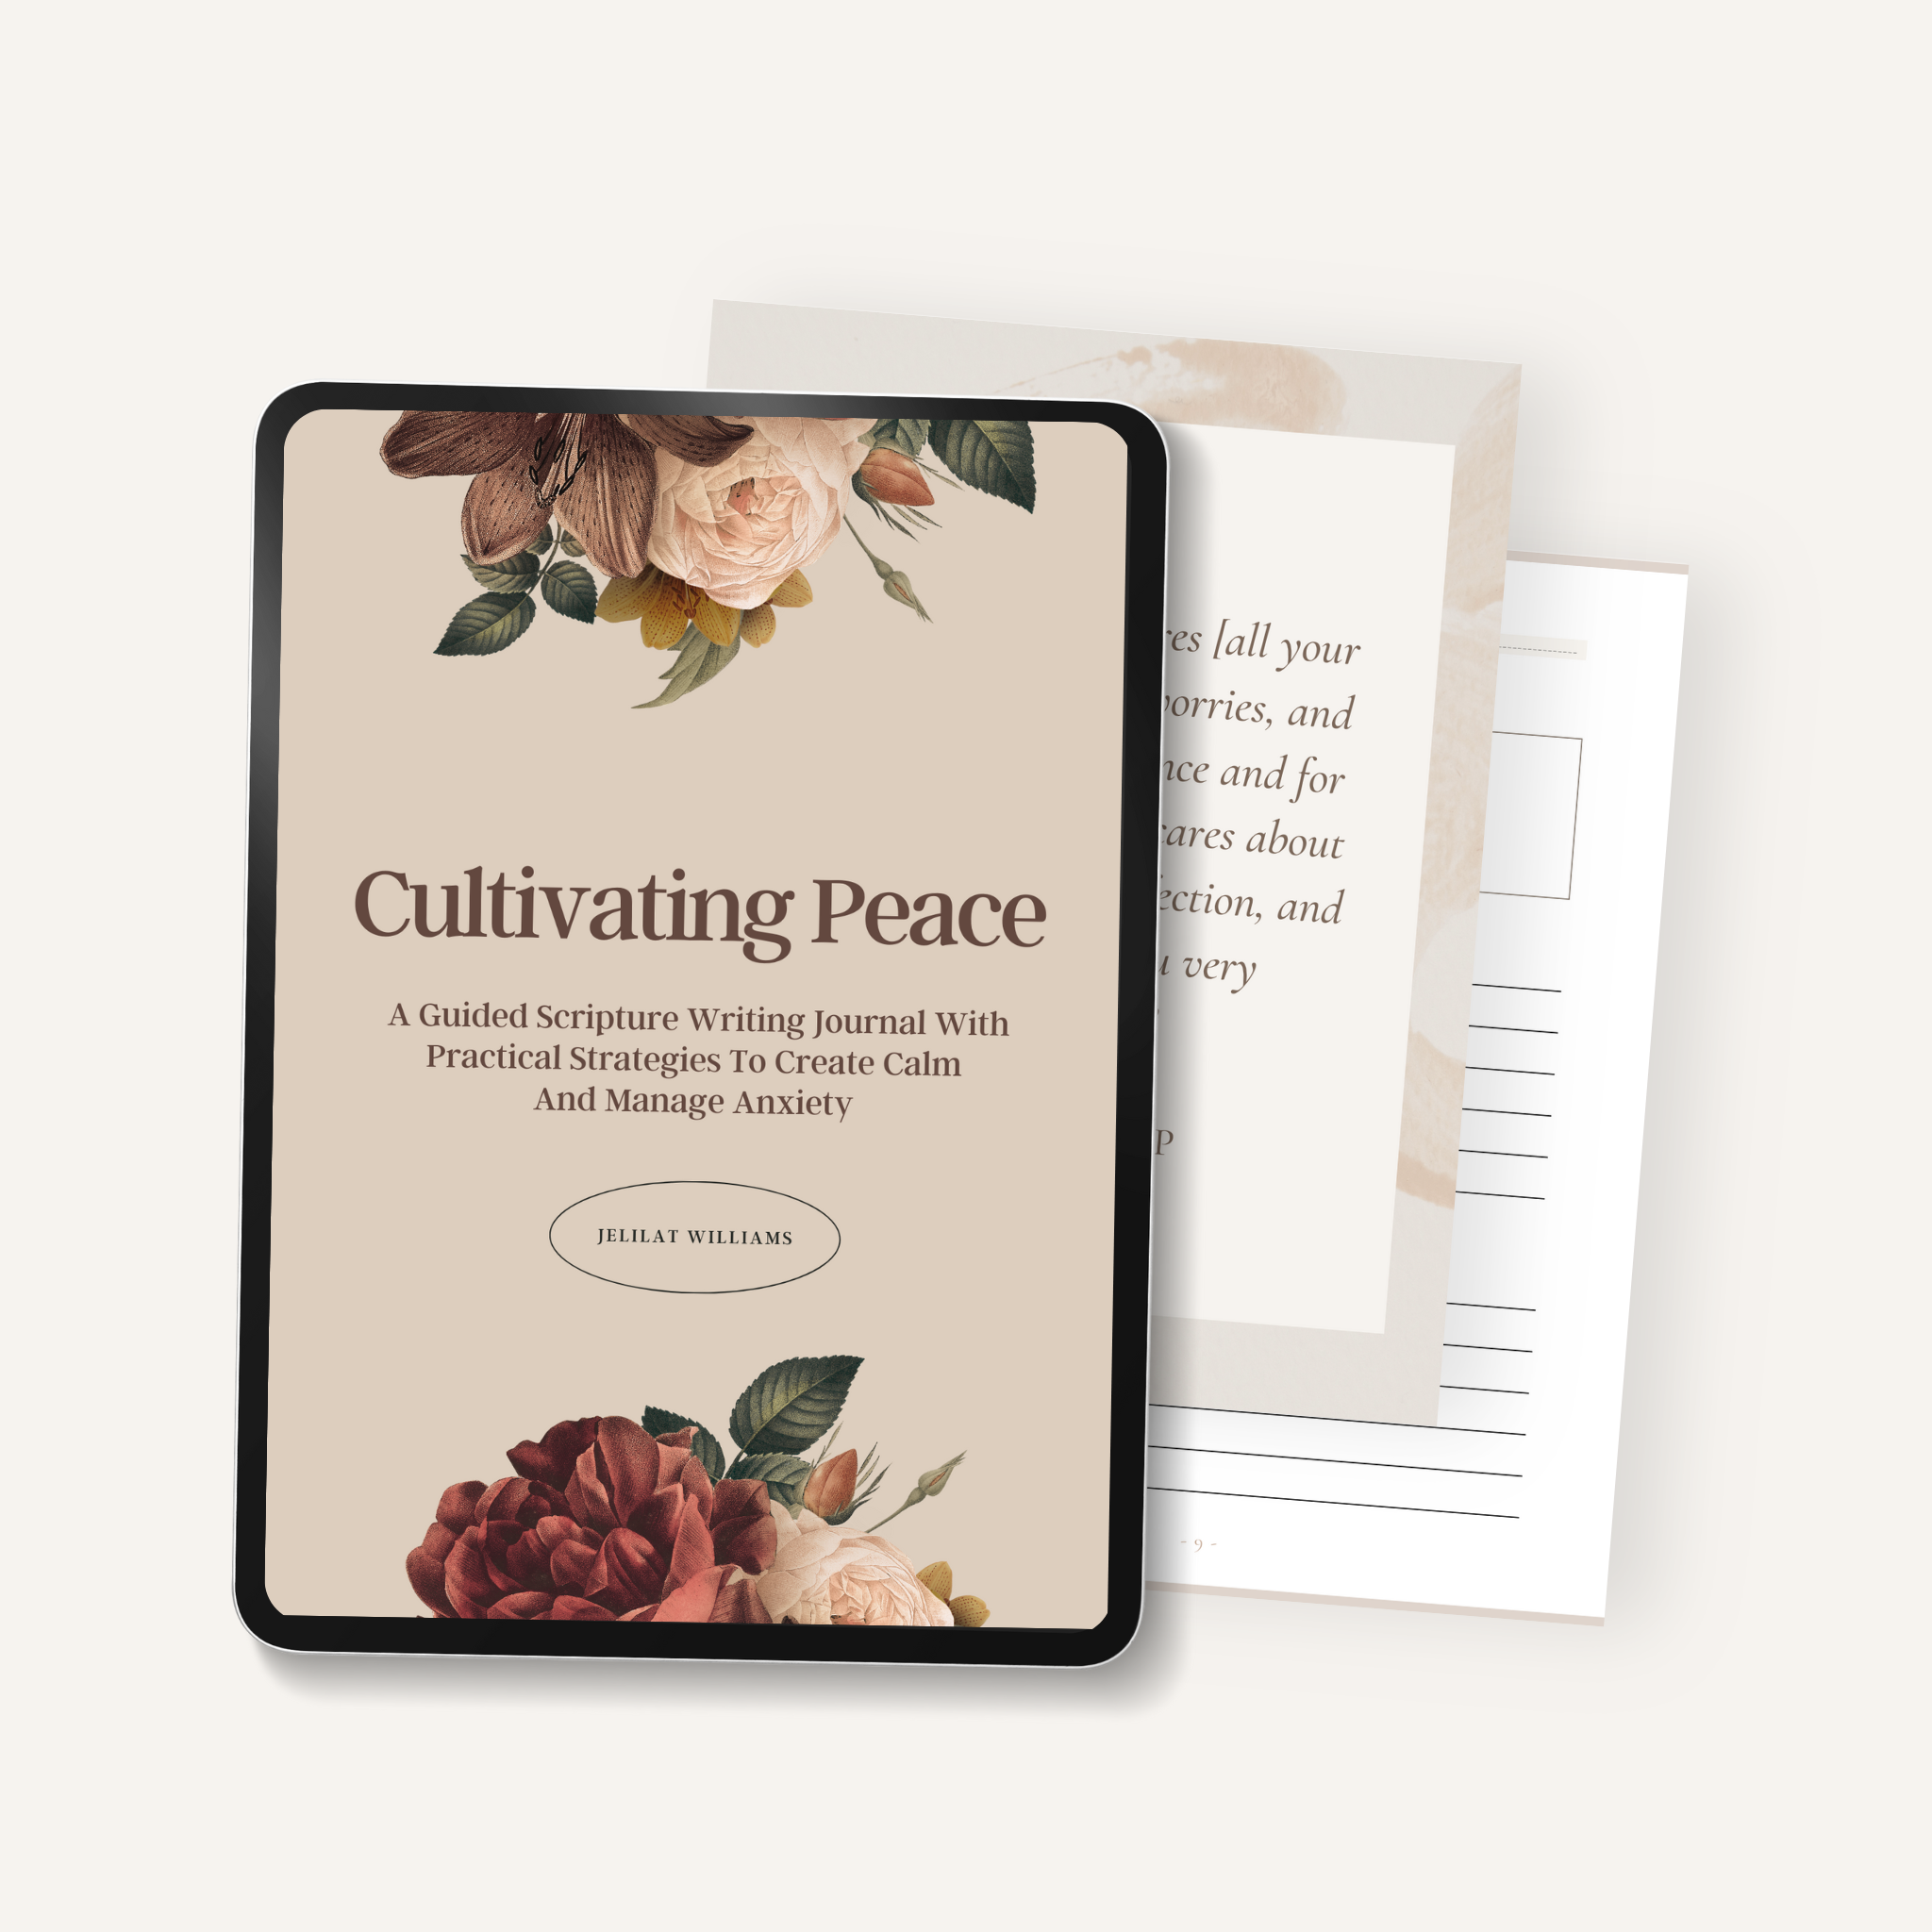 Cultivating Peace: A Guided Scripture Writing Journal With Practical Strategies To Create Calm And Manage Anxiety DIGITAL VERSION